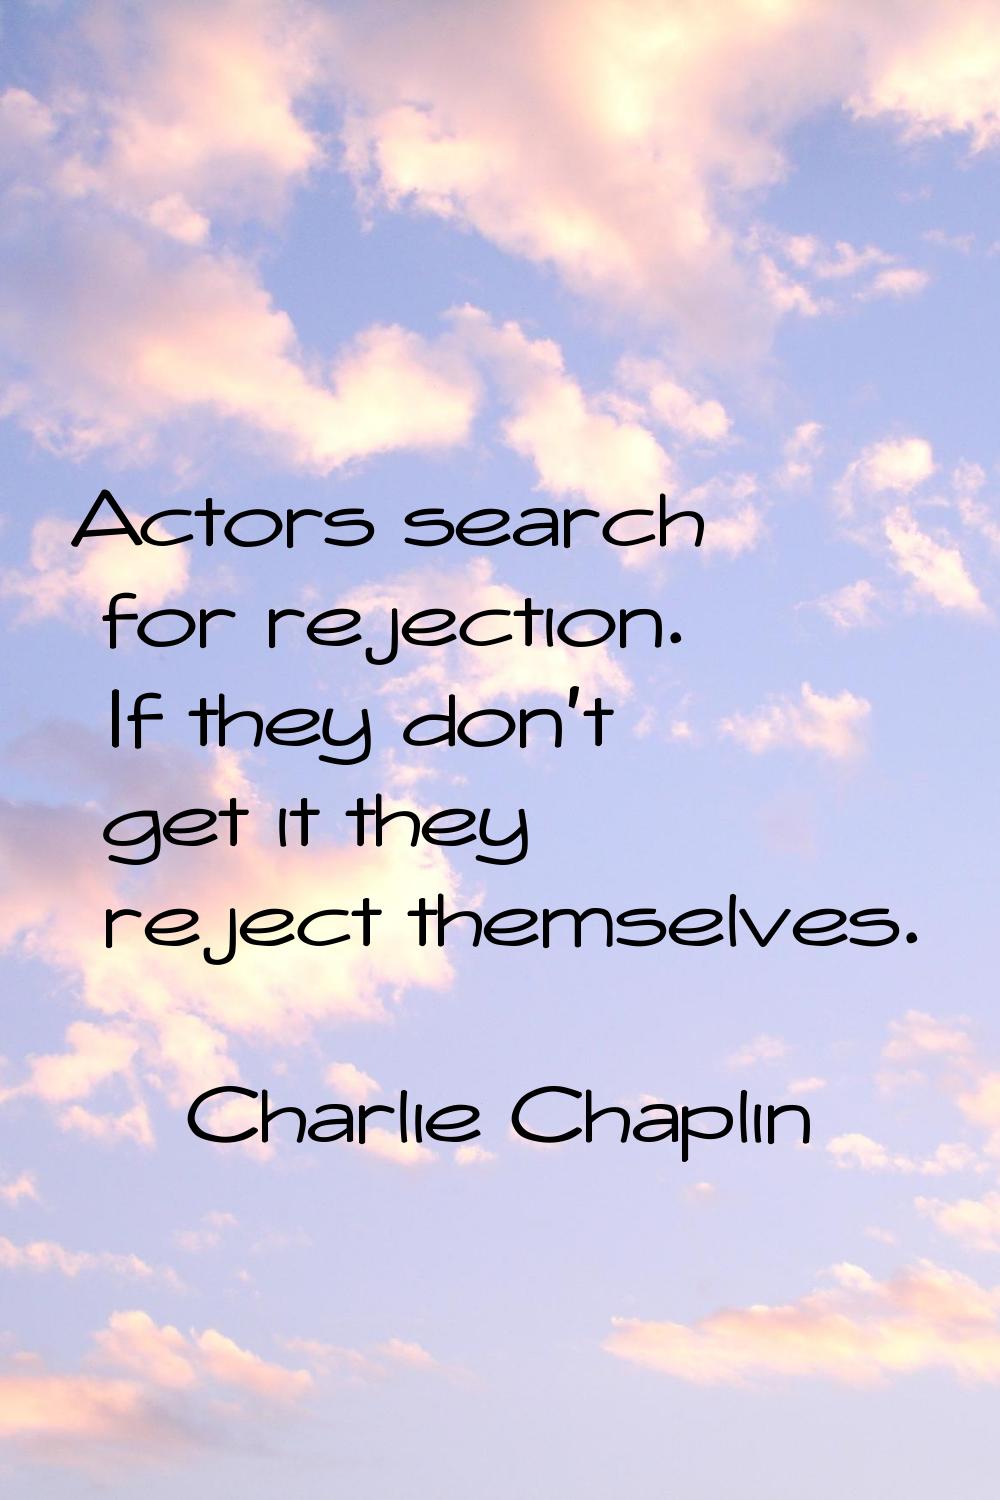 Actors search for rejection. If they don't get it they reject themselves.